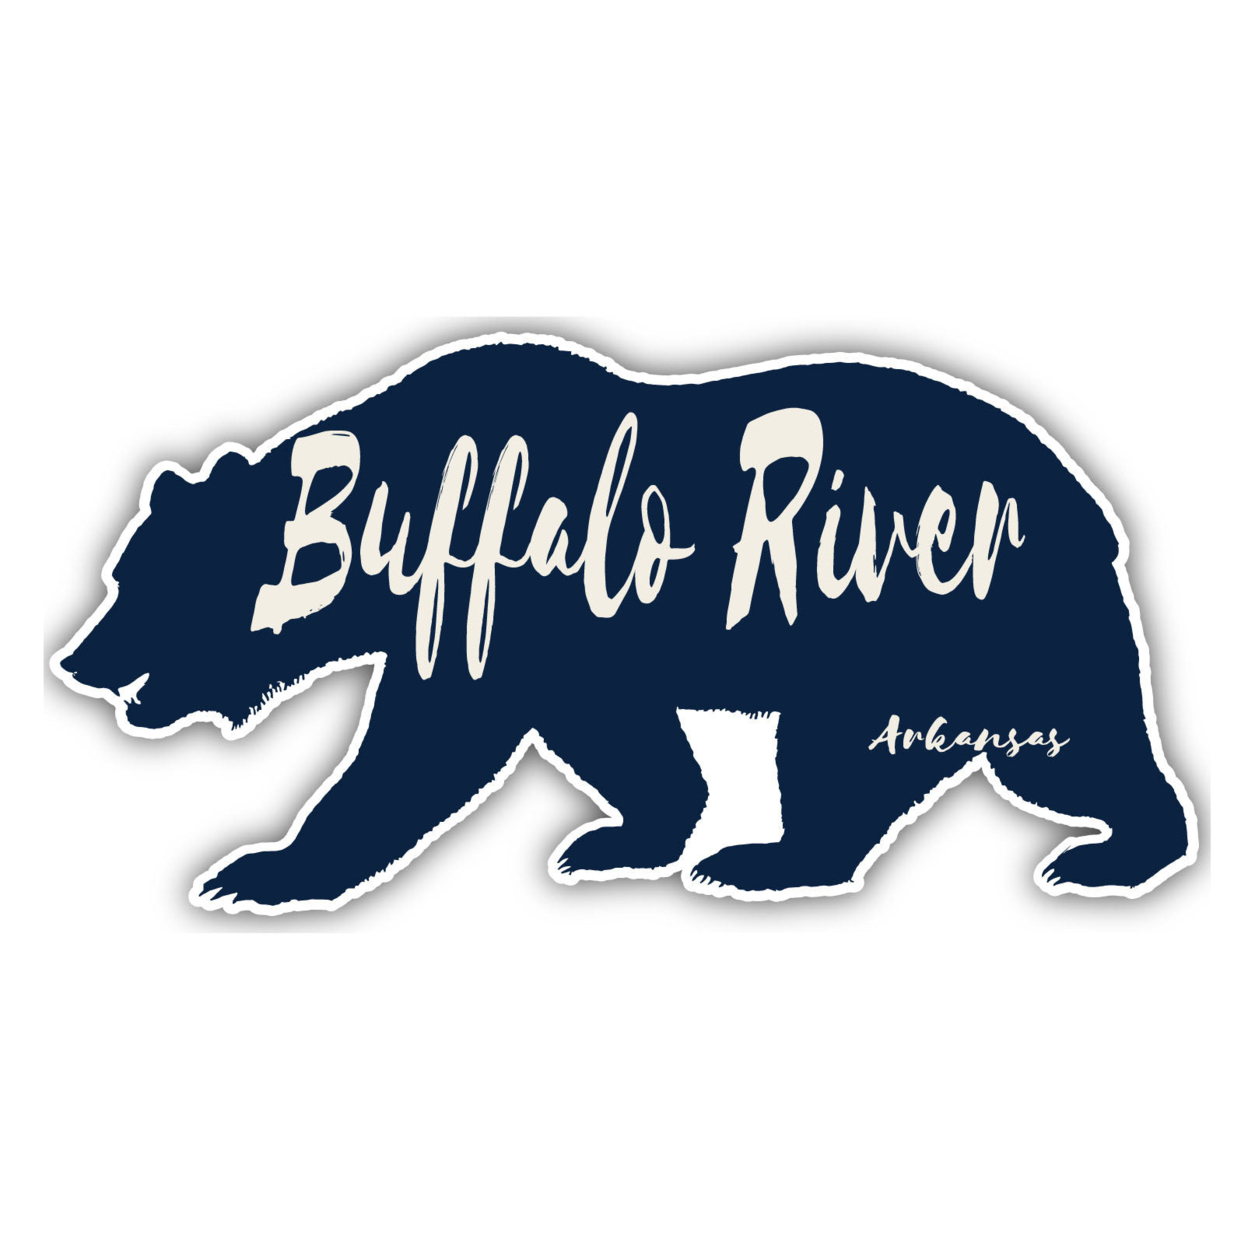 Buffalo River Arkansas Souvenir Decorative Stickers (Choose Theme And Size) - 4-Pack, 12-Inch, Great Outdoors